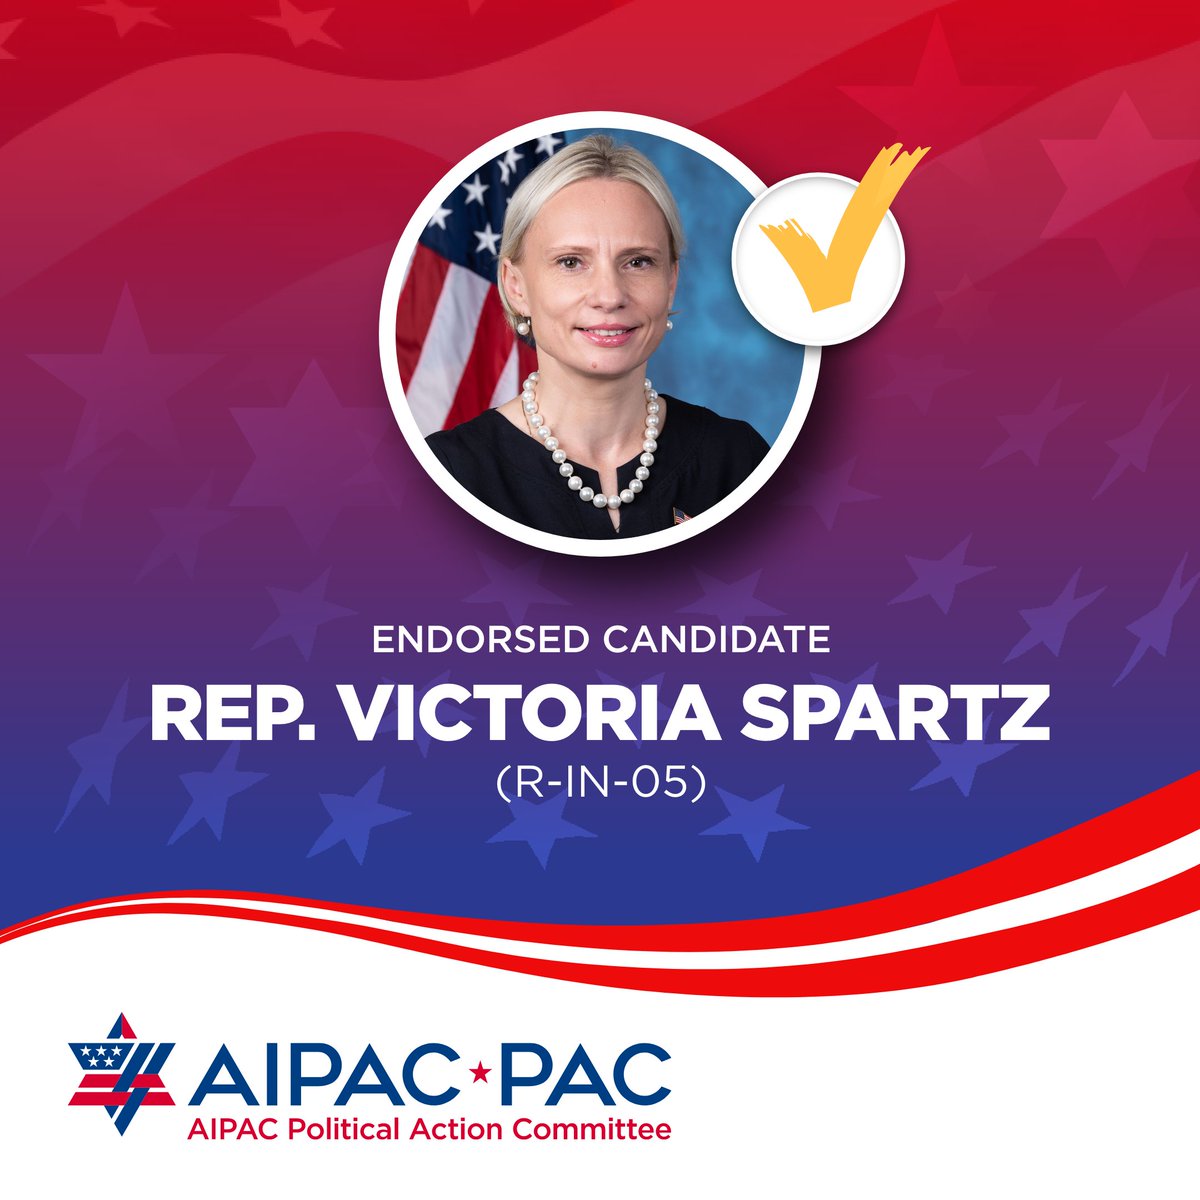 Congratulations to AIPAC-endorsed @RepSpartz on your primary election victory! We are proud to support pro-Israel candidates who help strengthen and expand the U.S.-Israel relationship. Being pro-Israel is good policy and good politics.